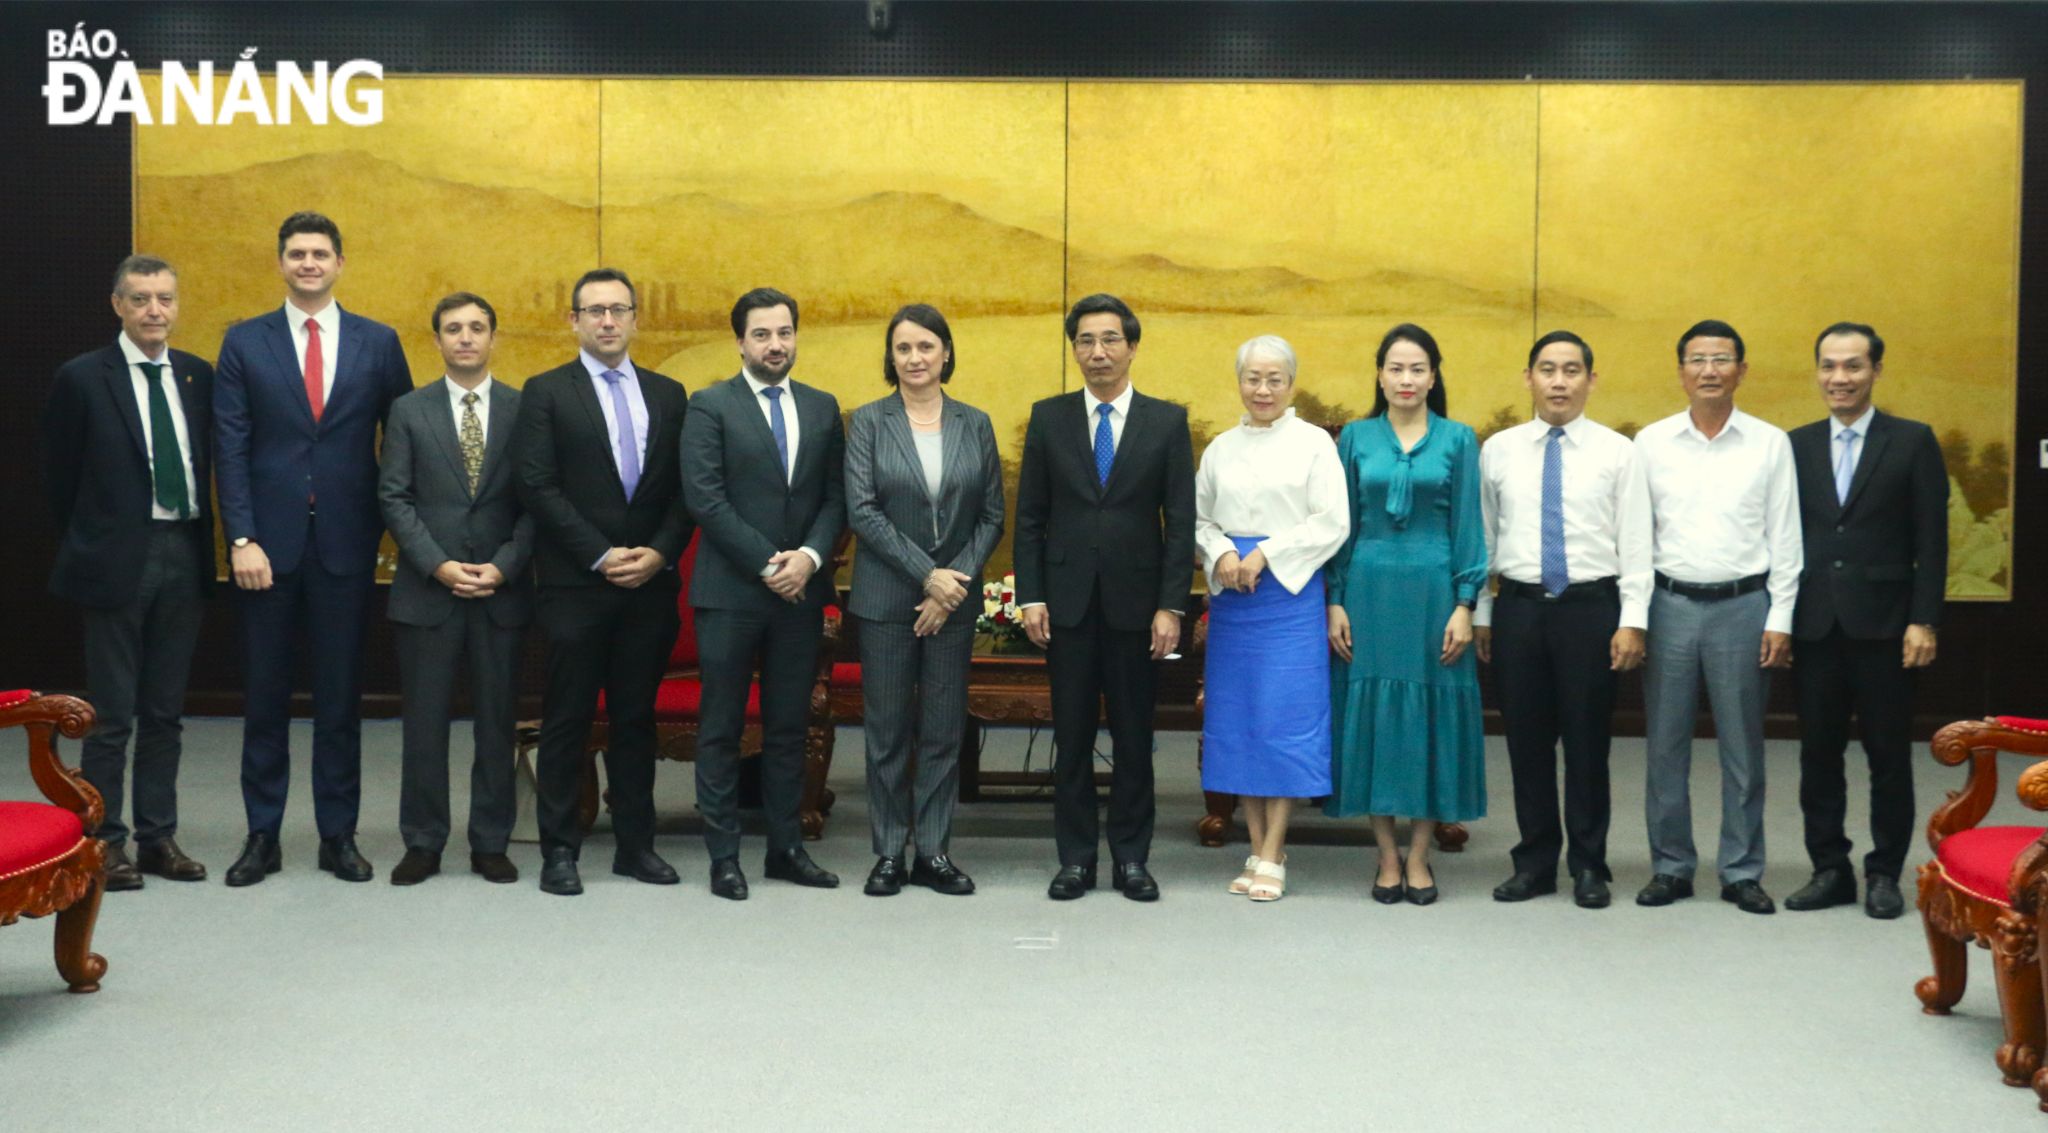 Representatives of Da Nang and the French Consulate General in HCMC posing for a group photo. Photo: T.PHUONG